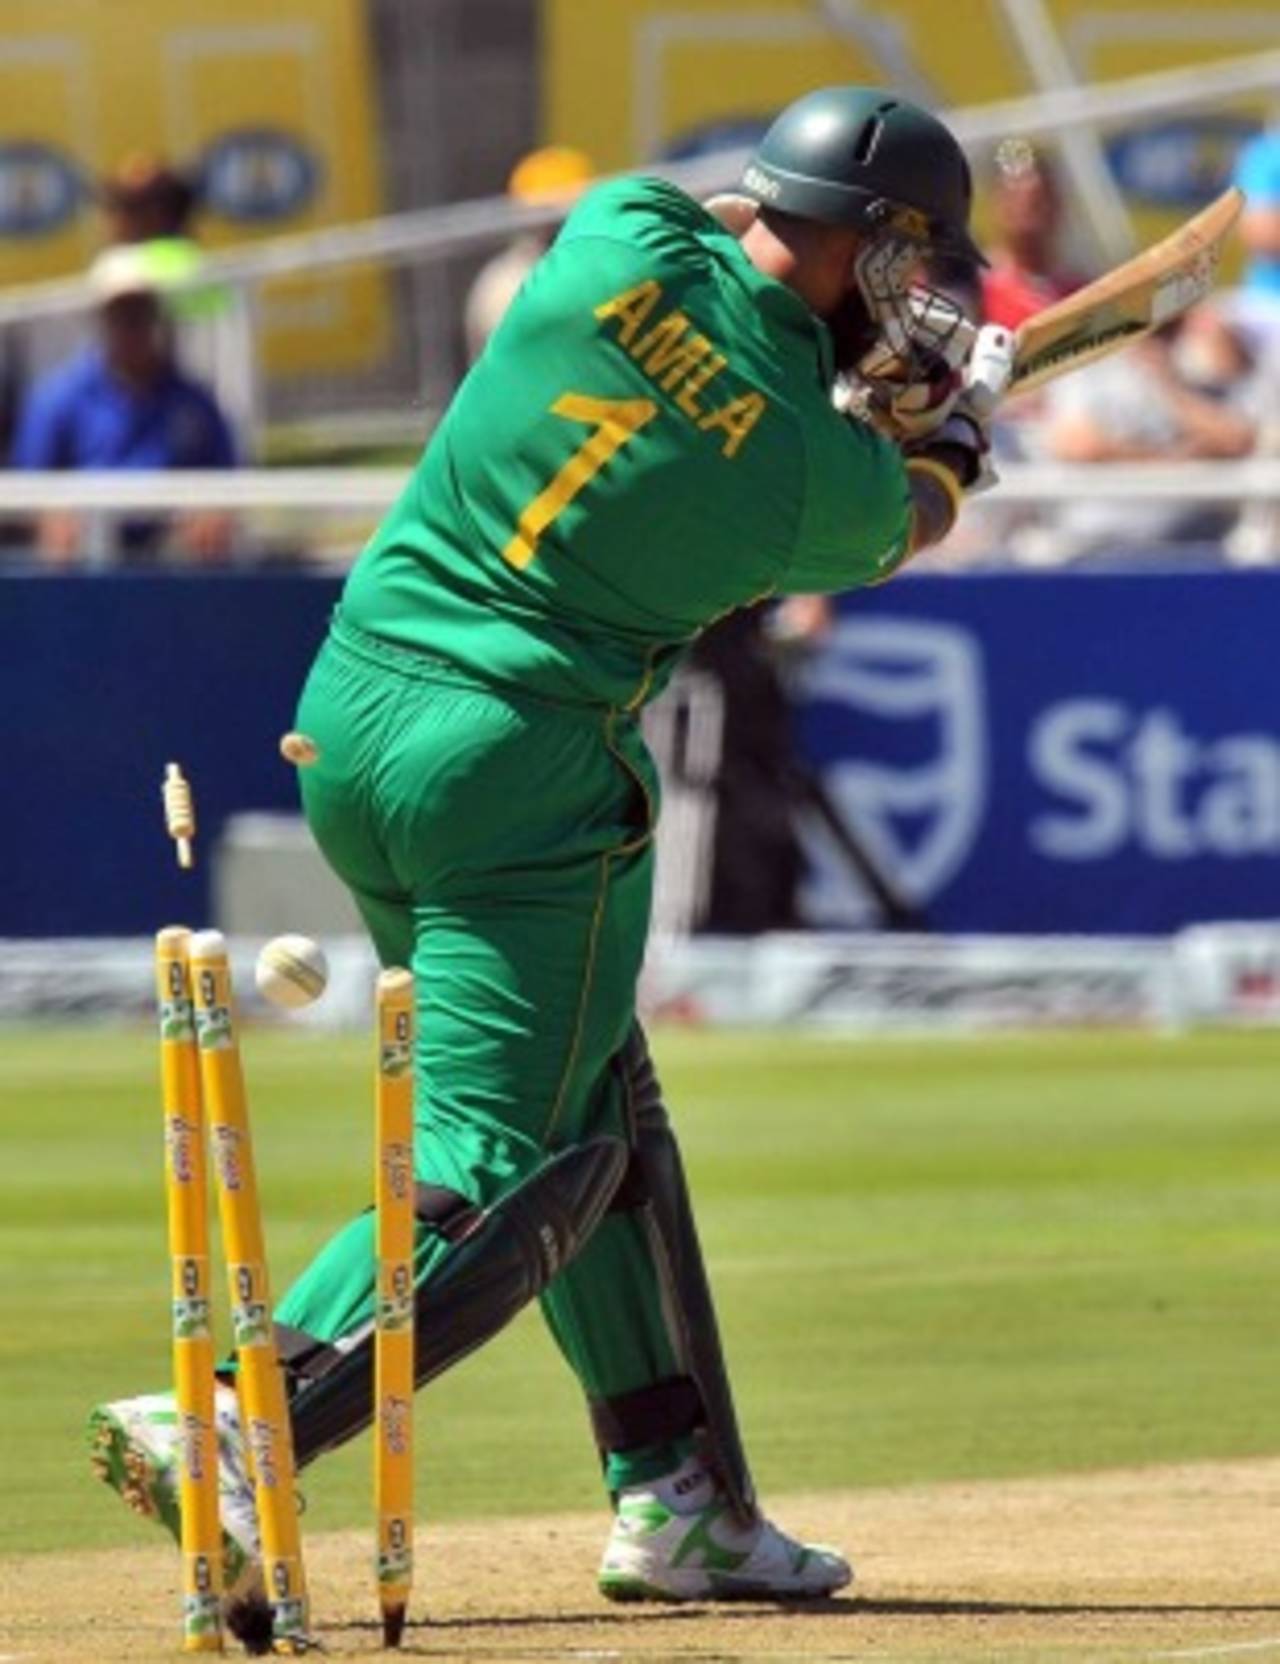 Hashim Amla is bowled by Zaheer Khan, South Africa v India, 3rd ODI, Cape Town, January 18, 2011